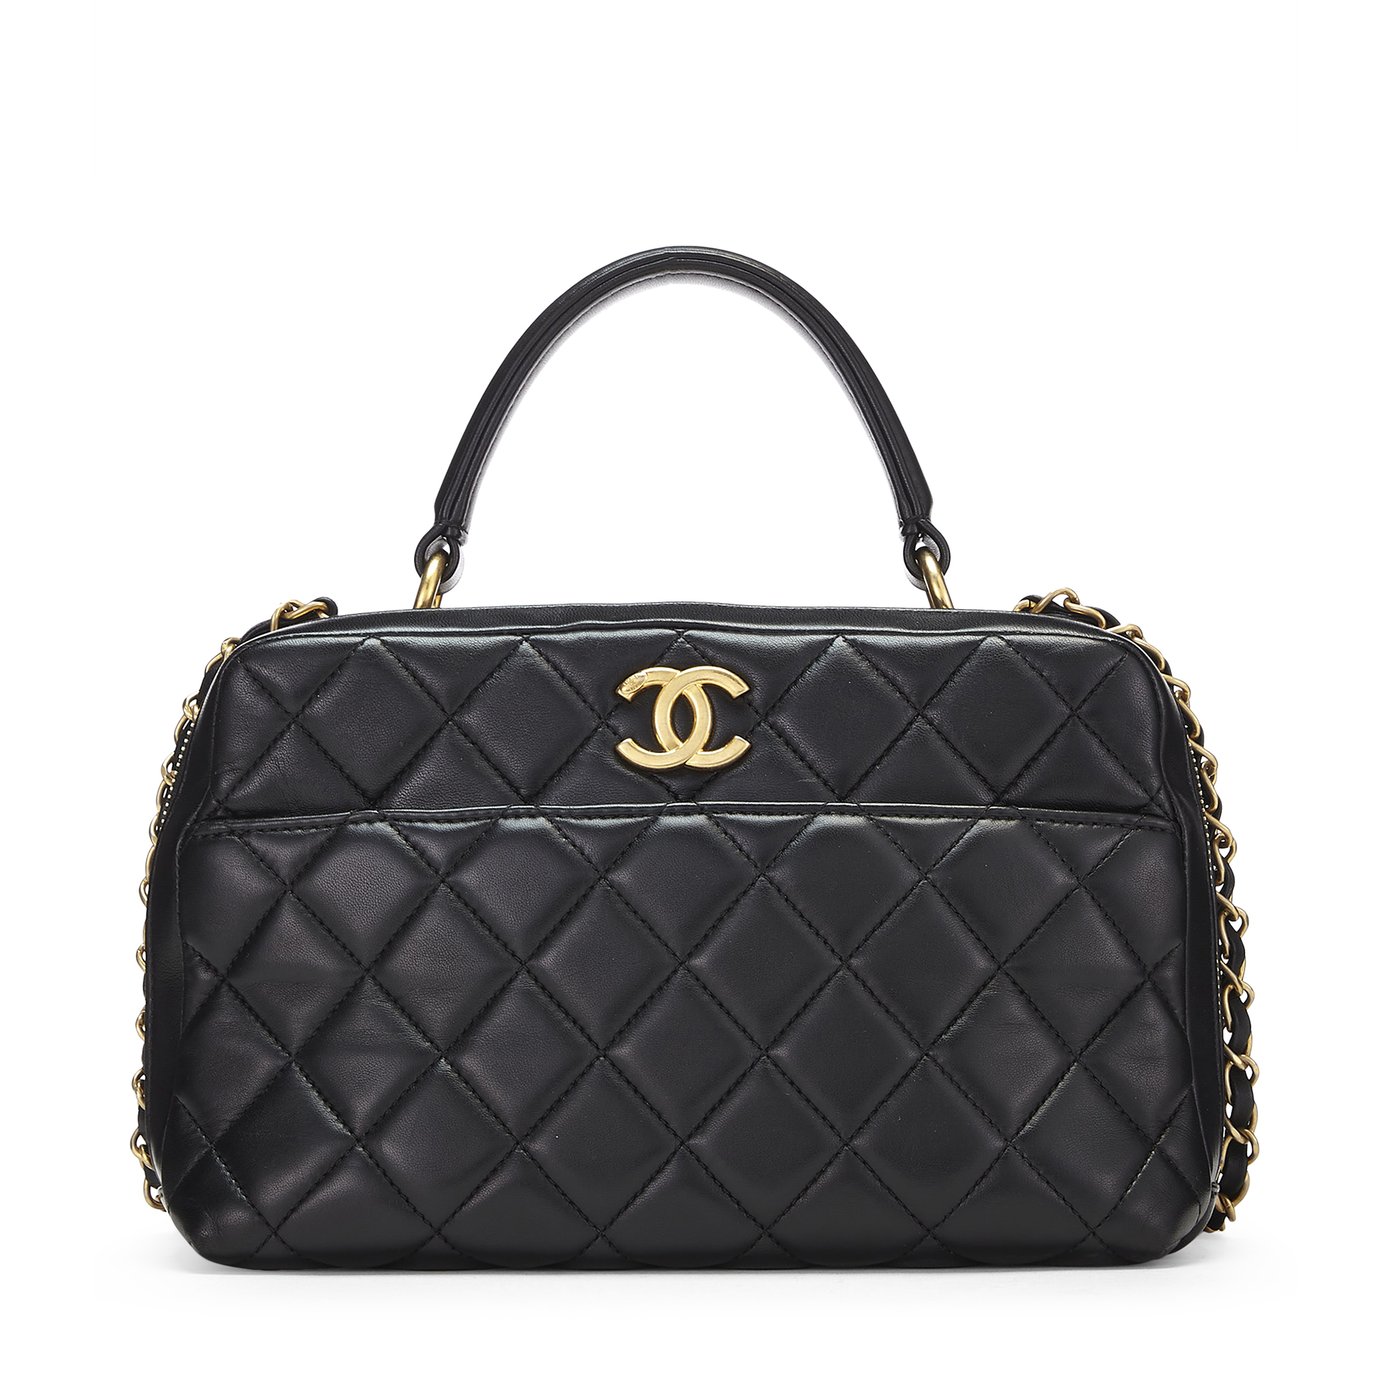 chanel wallet for sale